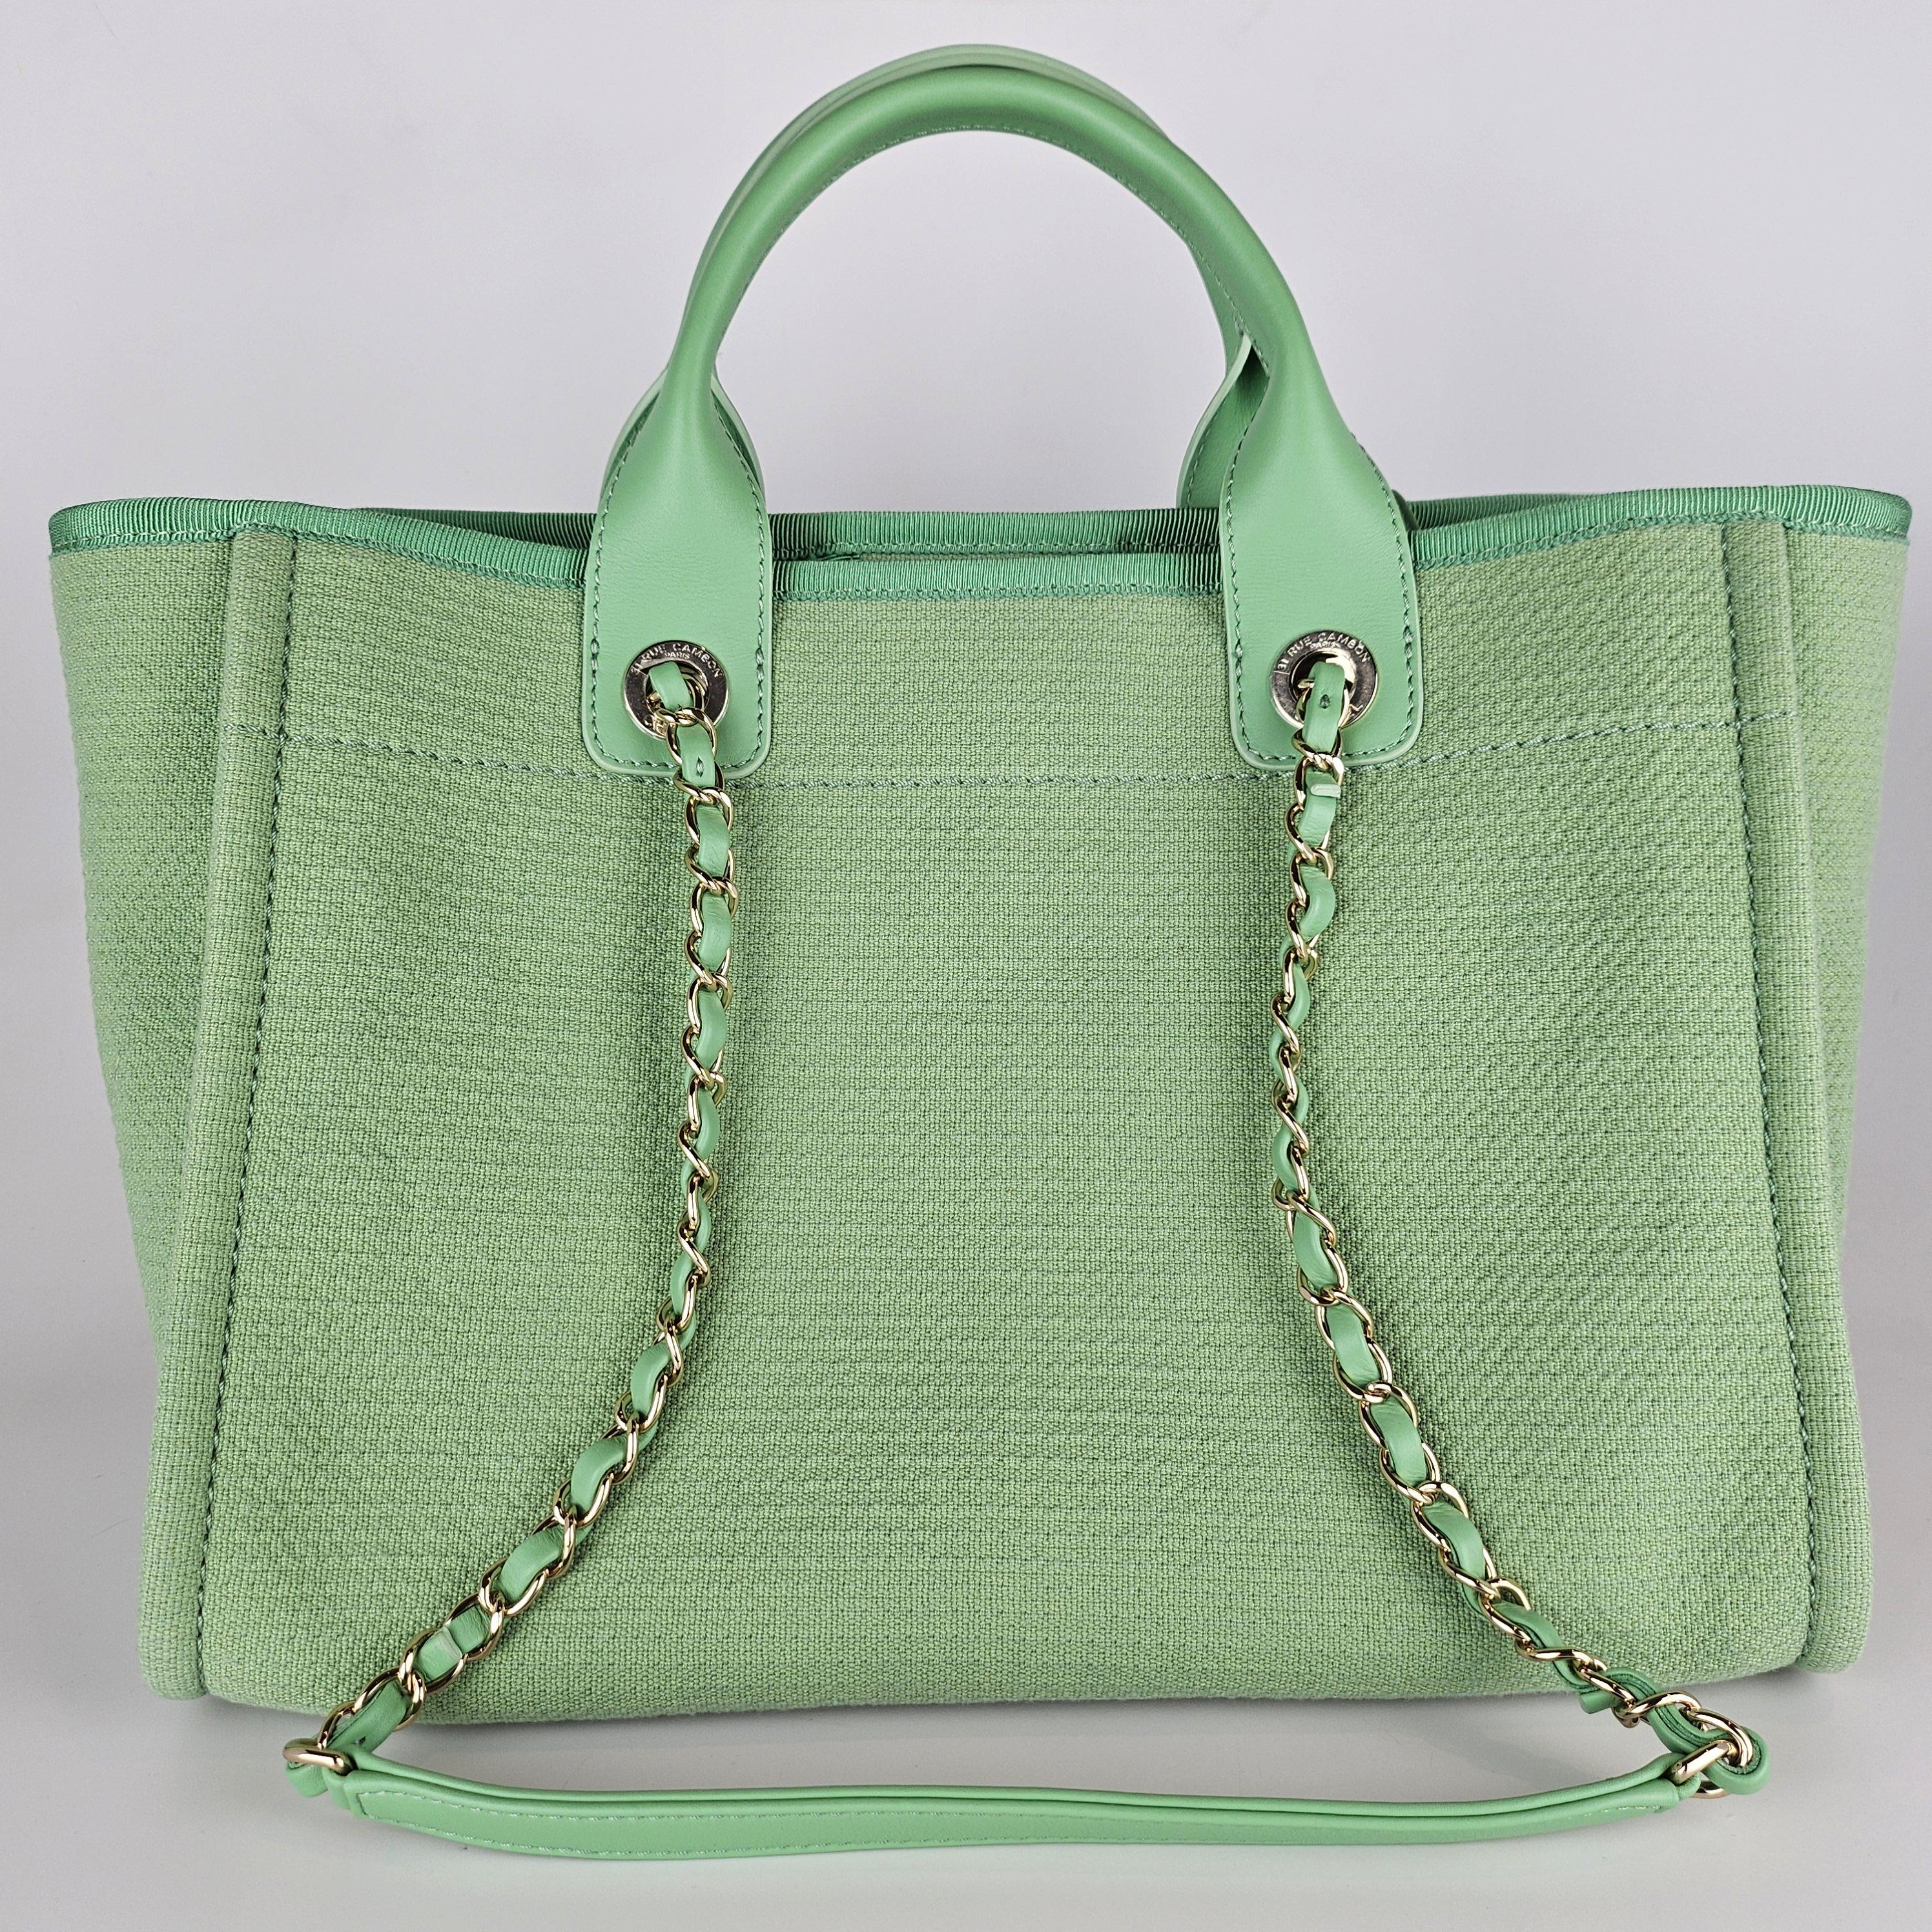 Chanel Limited Edition Small Deauville Tote Green In Excellent Condition For Sale In Denver, CO